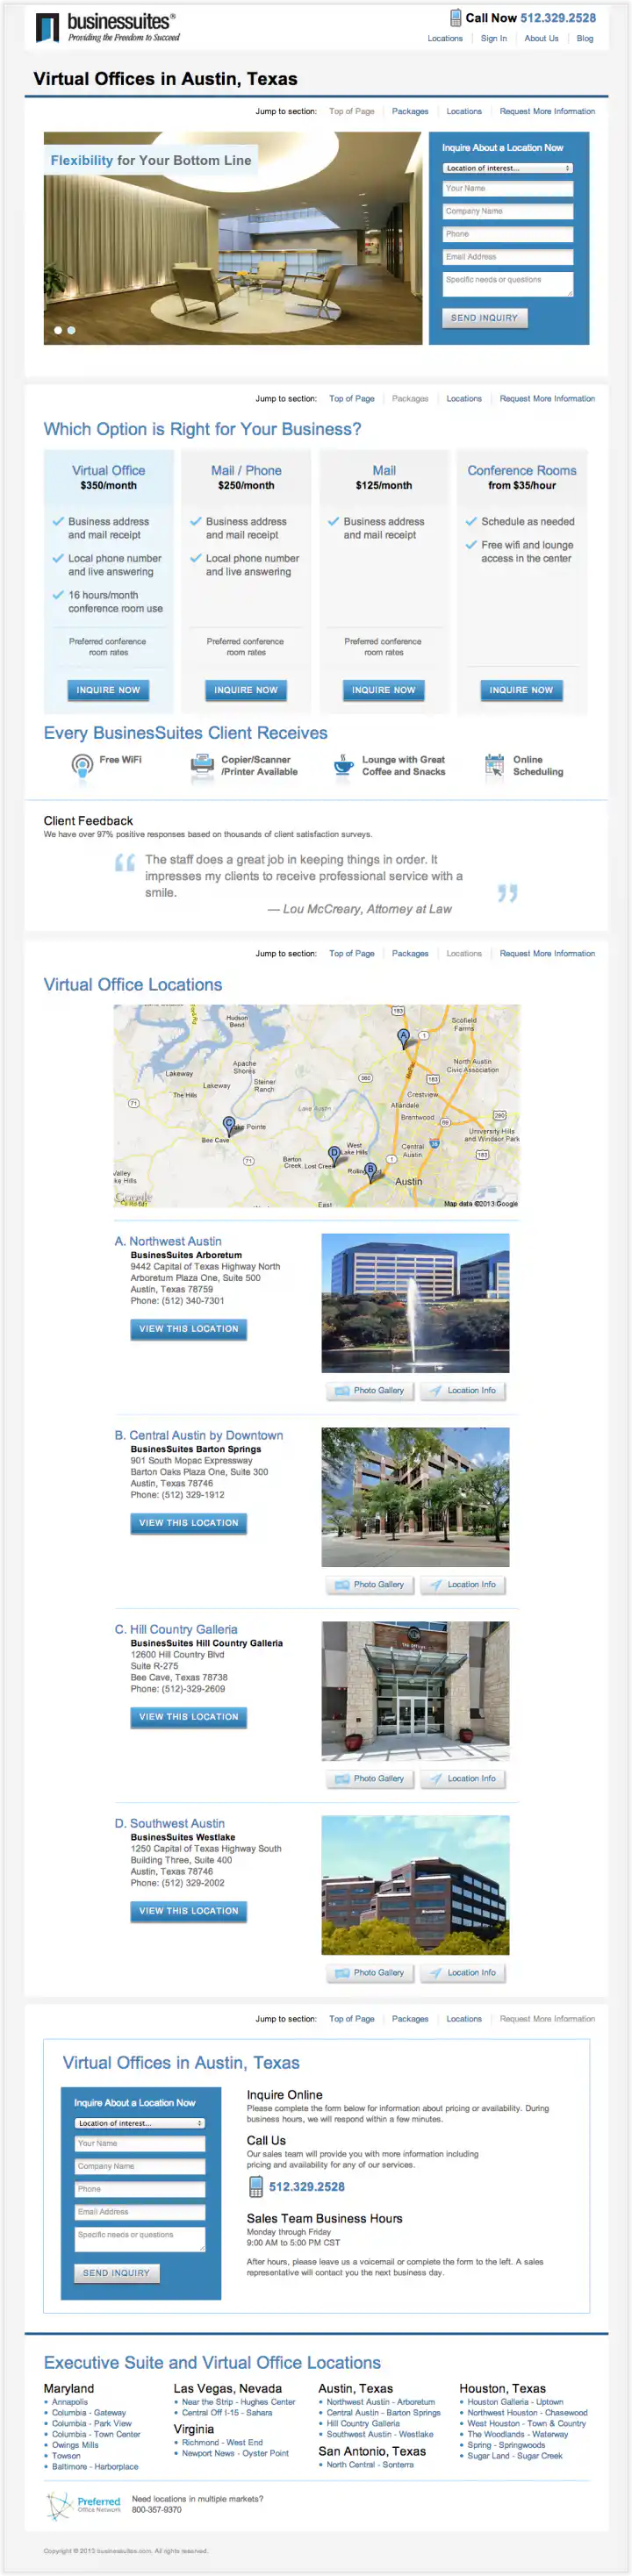 BusinesSuites Virtual Offices Page - version 1